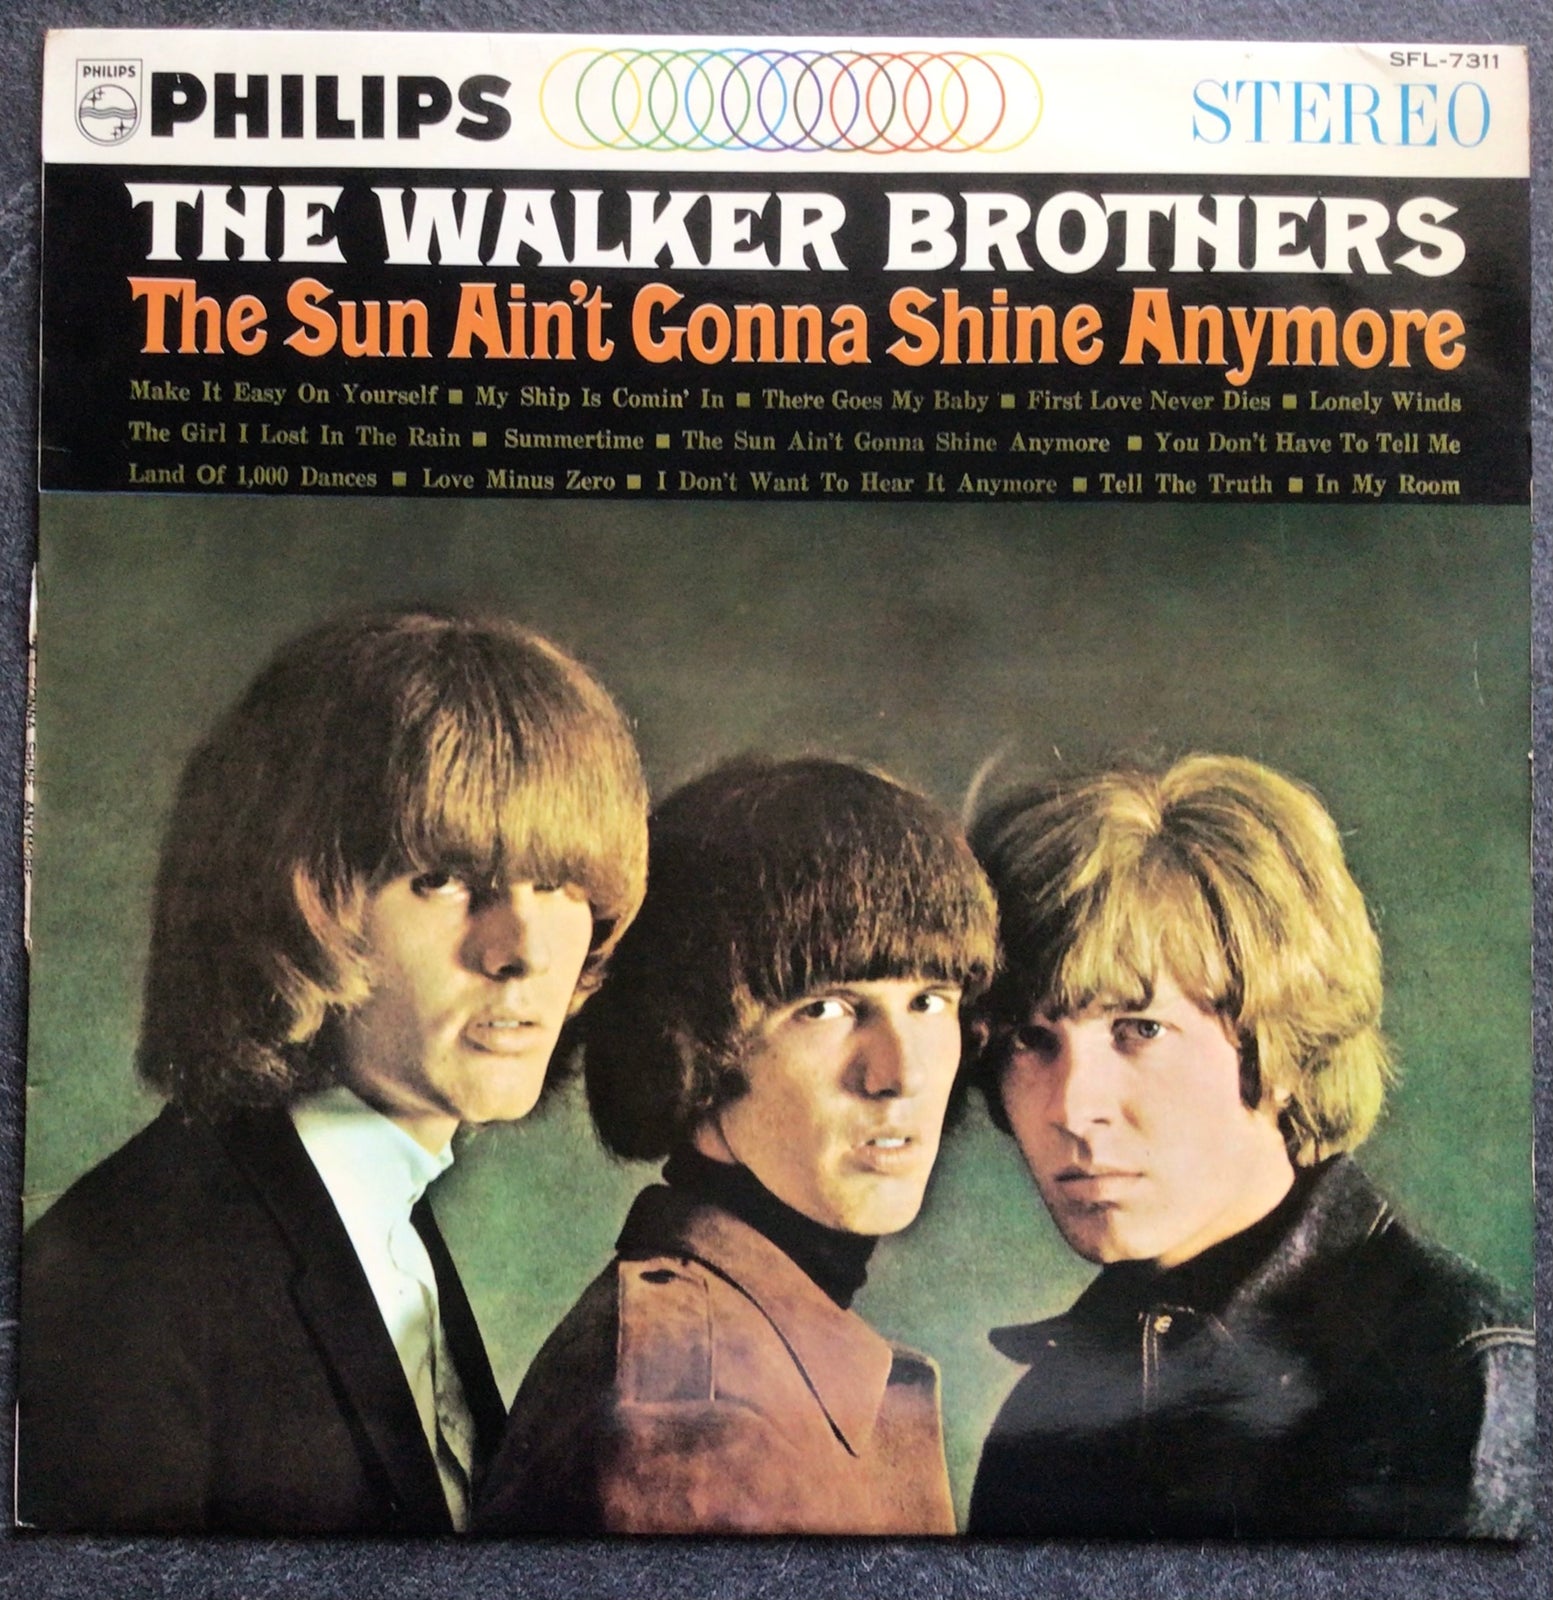 LP, The Walker Brothers, The Sun aint gonna shine anymore